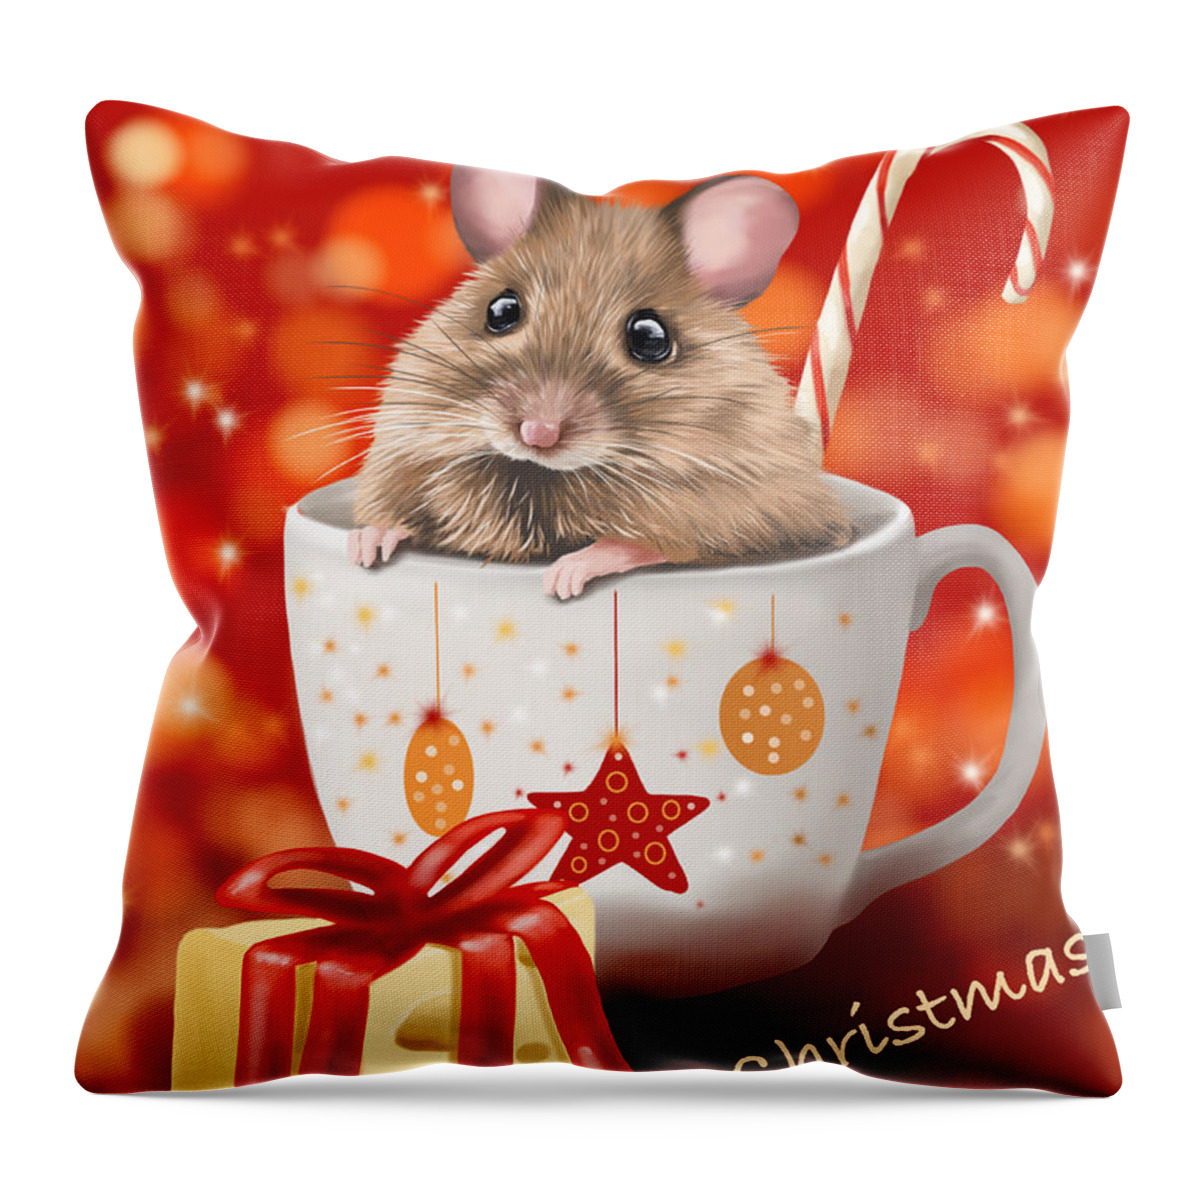 Ipad Throw Pillow featuring the painting Christmas cup by Veronica Minozzi